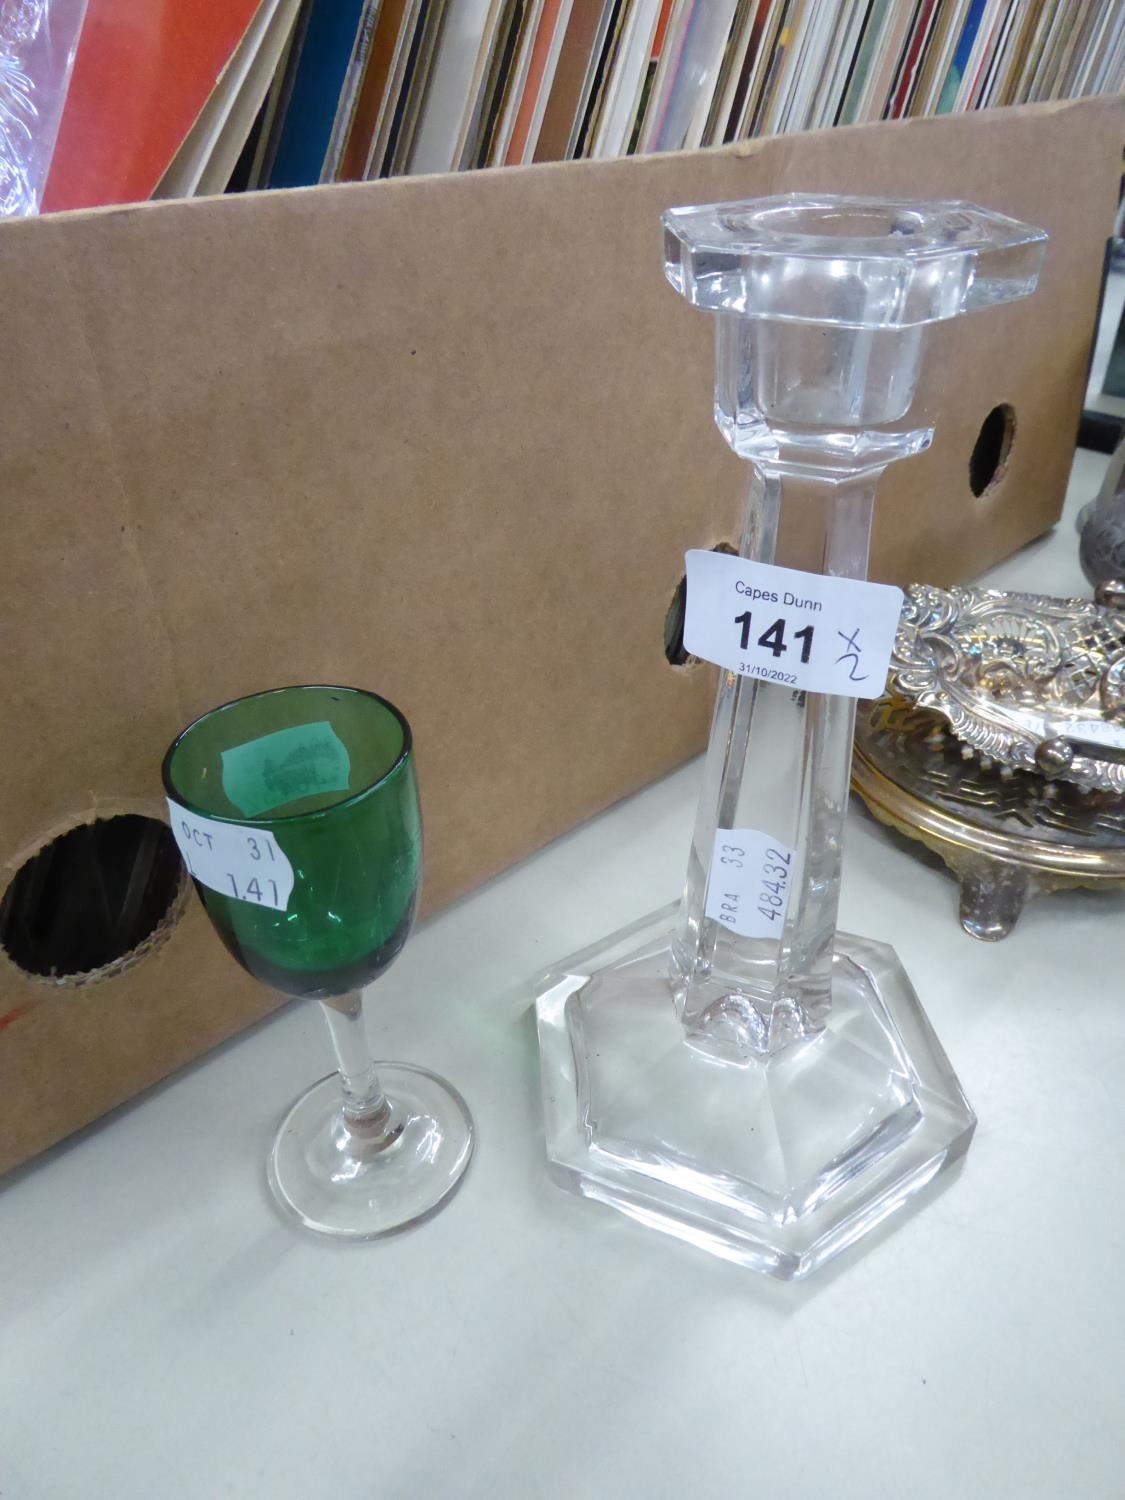 A GLASS CANDLESTICK AND A WINE GLASS WITH GREEN BOWL